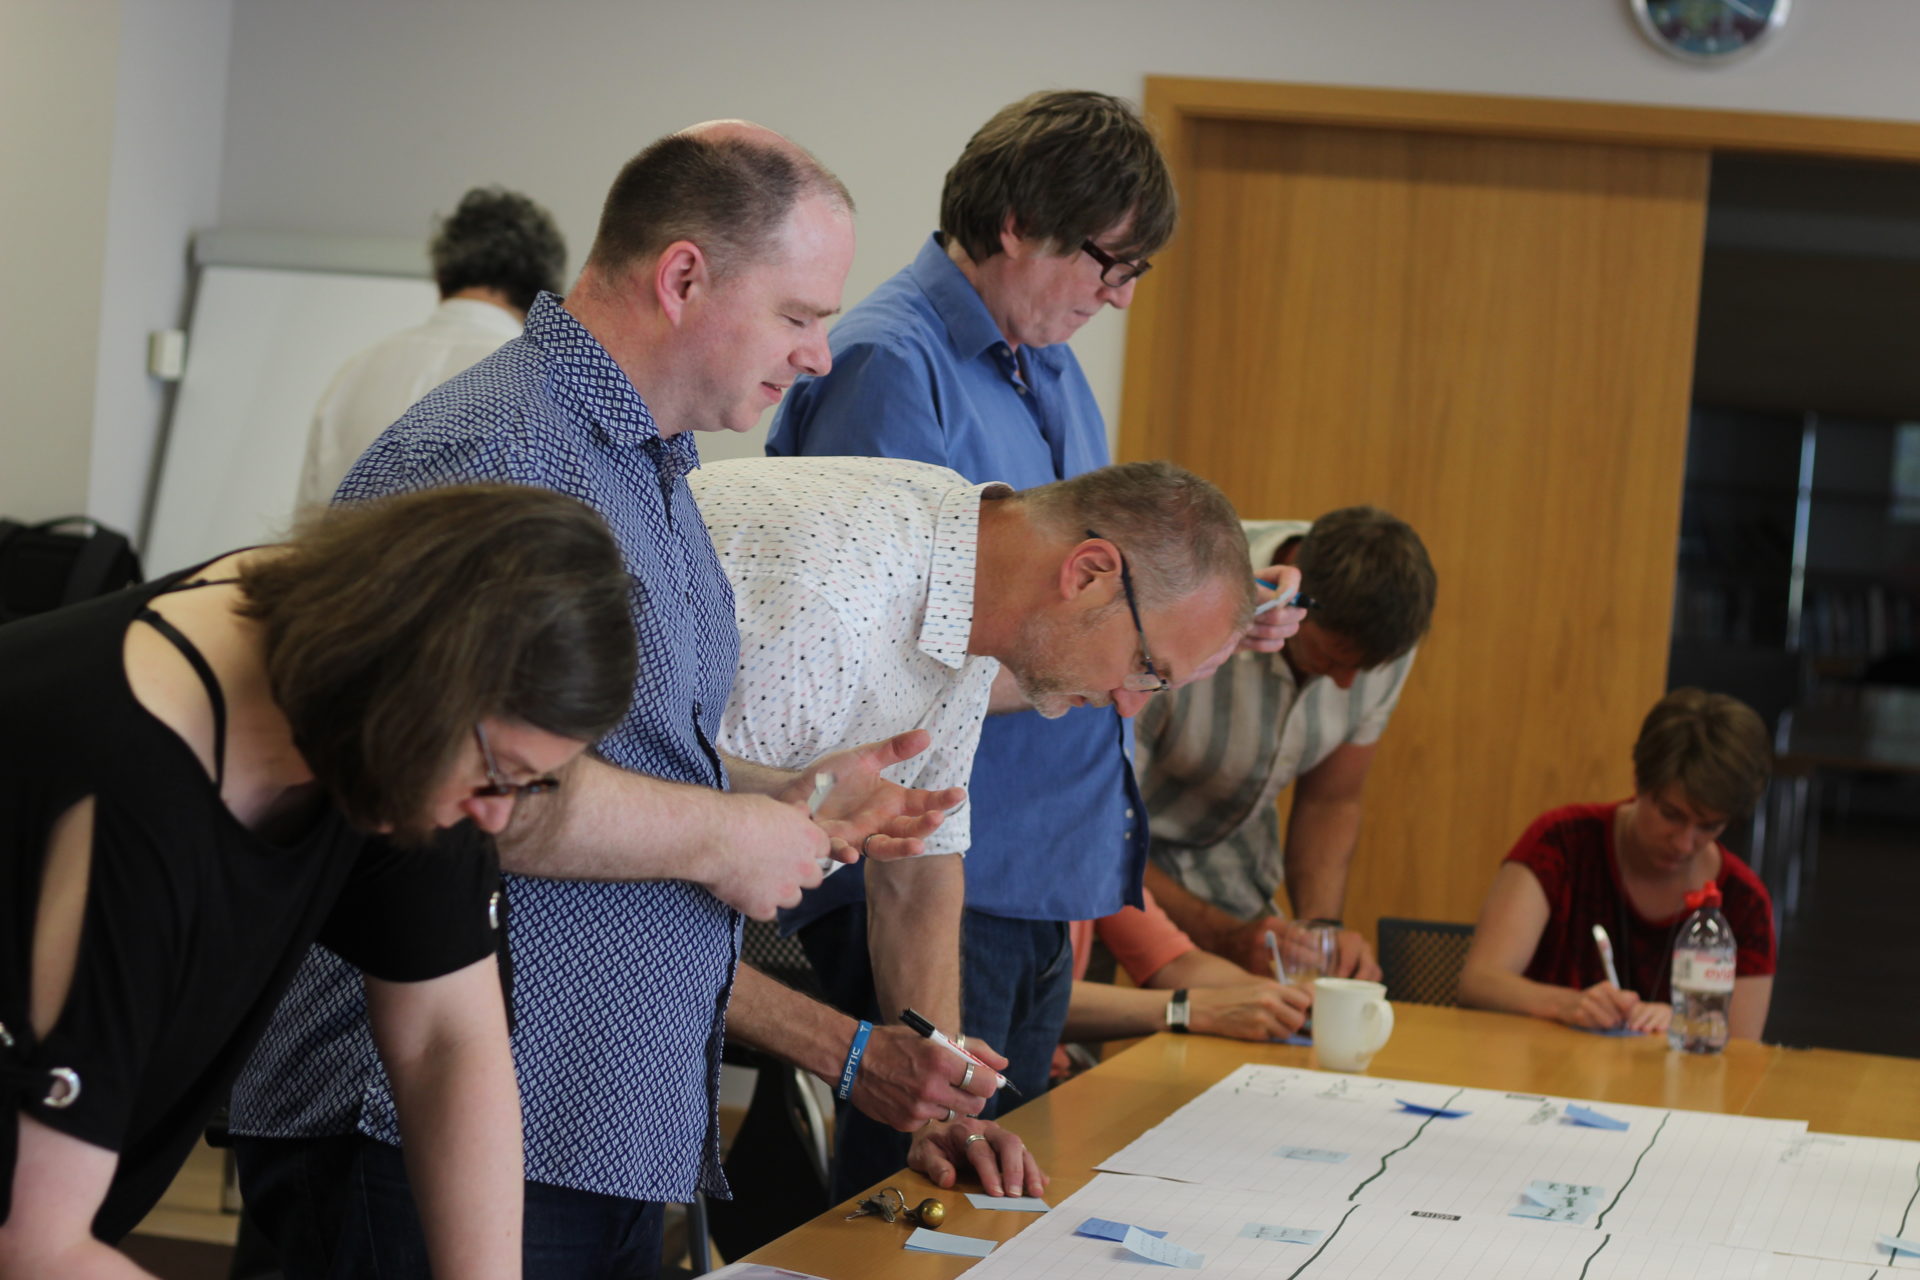 6 Workshop participants continue to elaborate on the timeline, looking at papers spread across a table